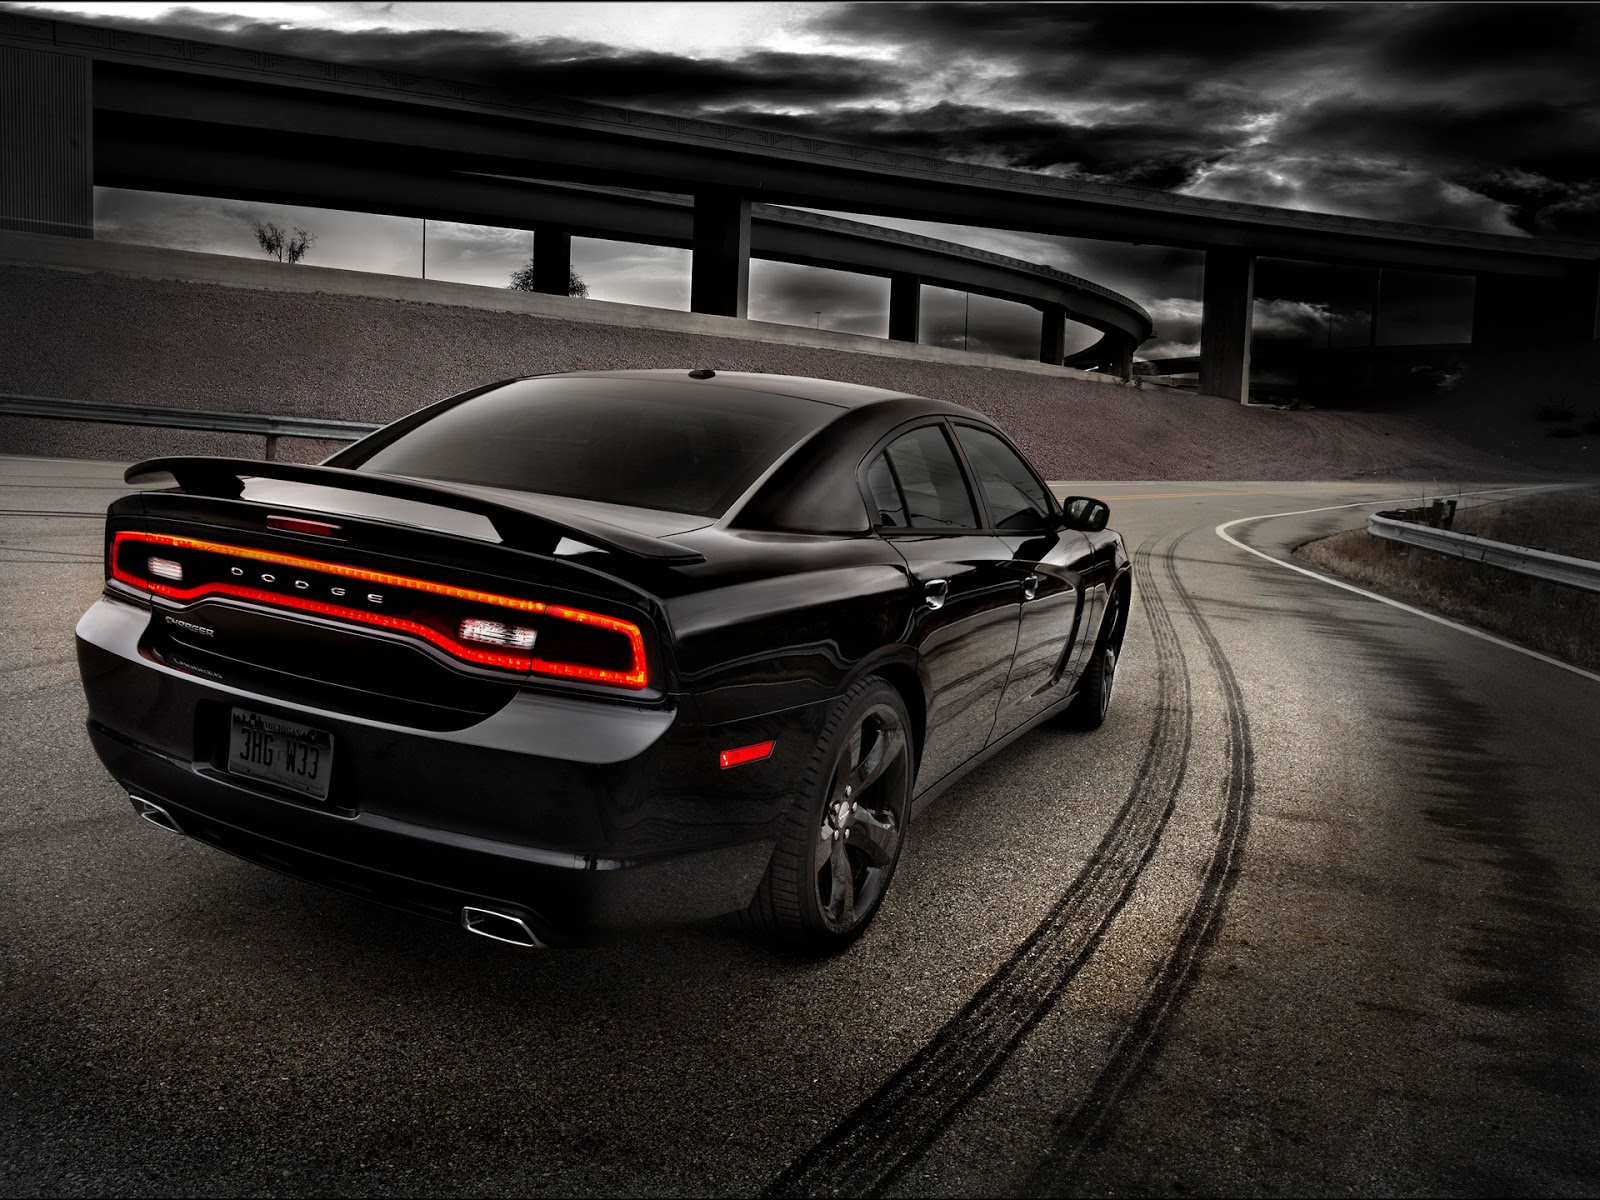 HD Wallpaper Dodge Charger Rt